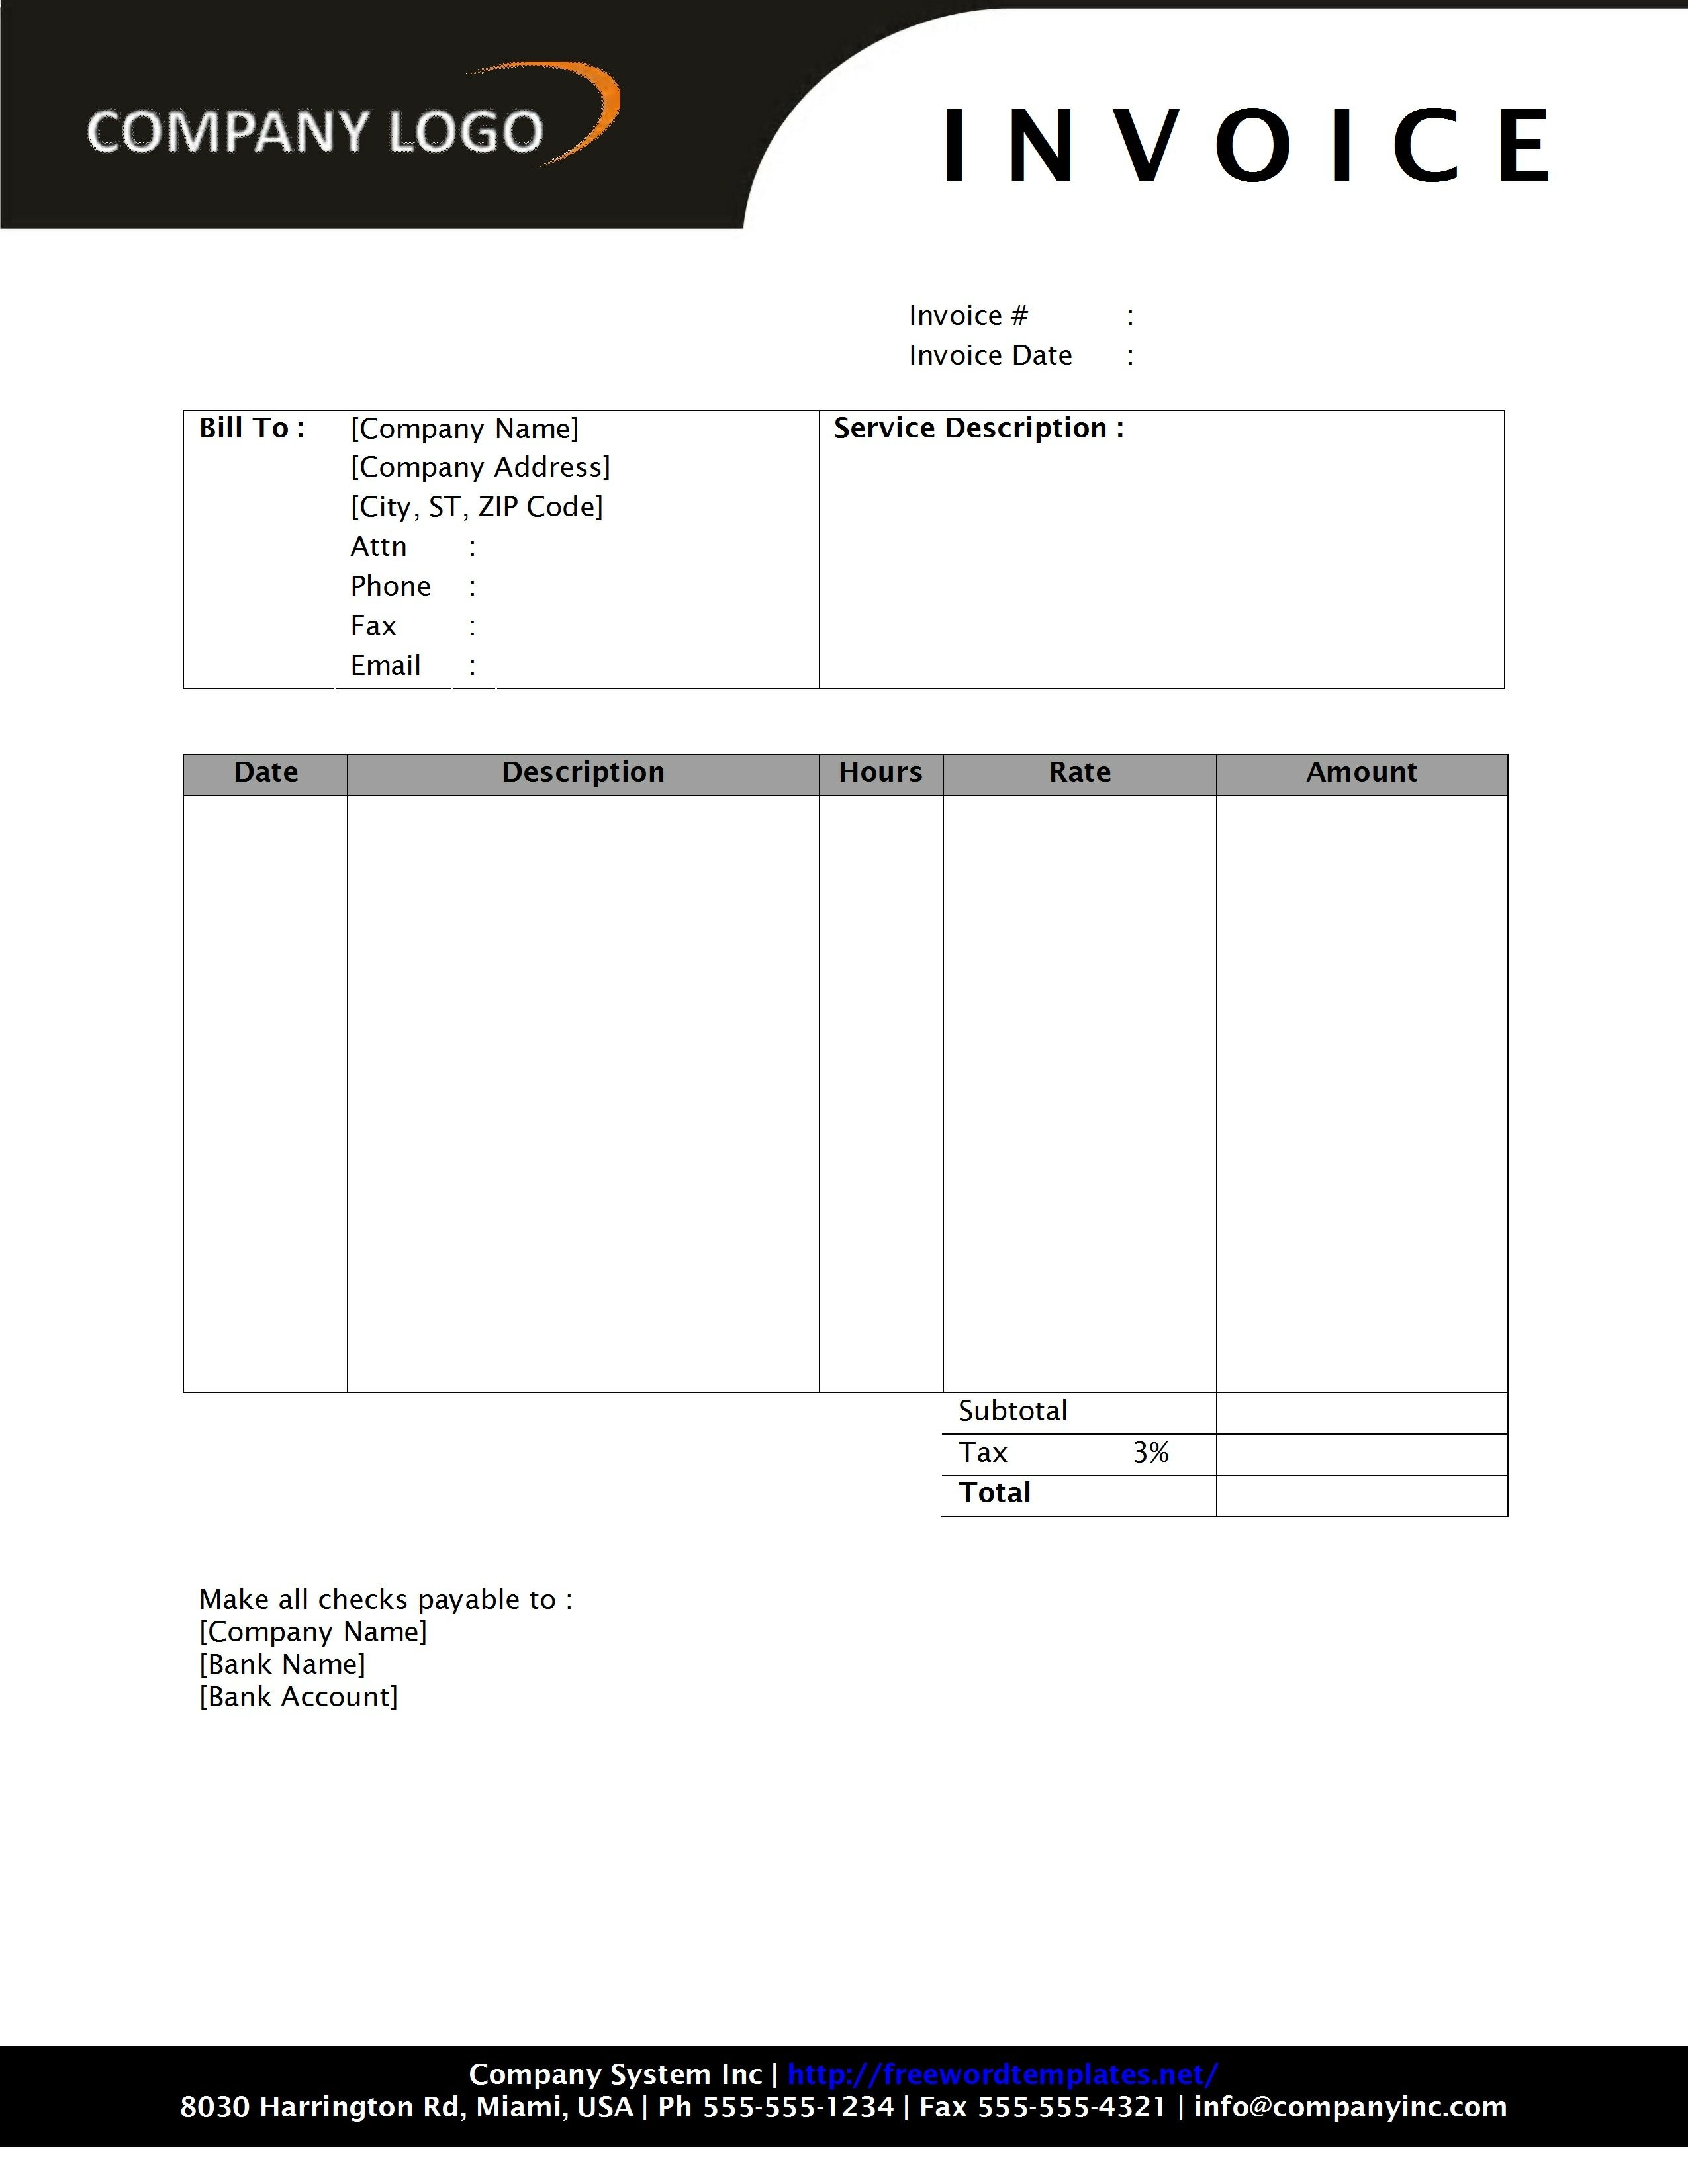 microsoft word invoice template 2010 best business template invoice templates free download